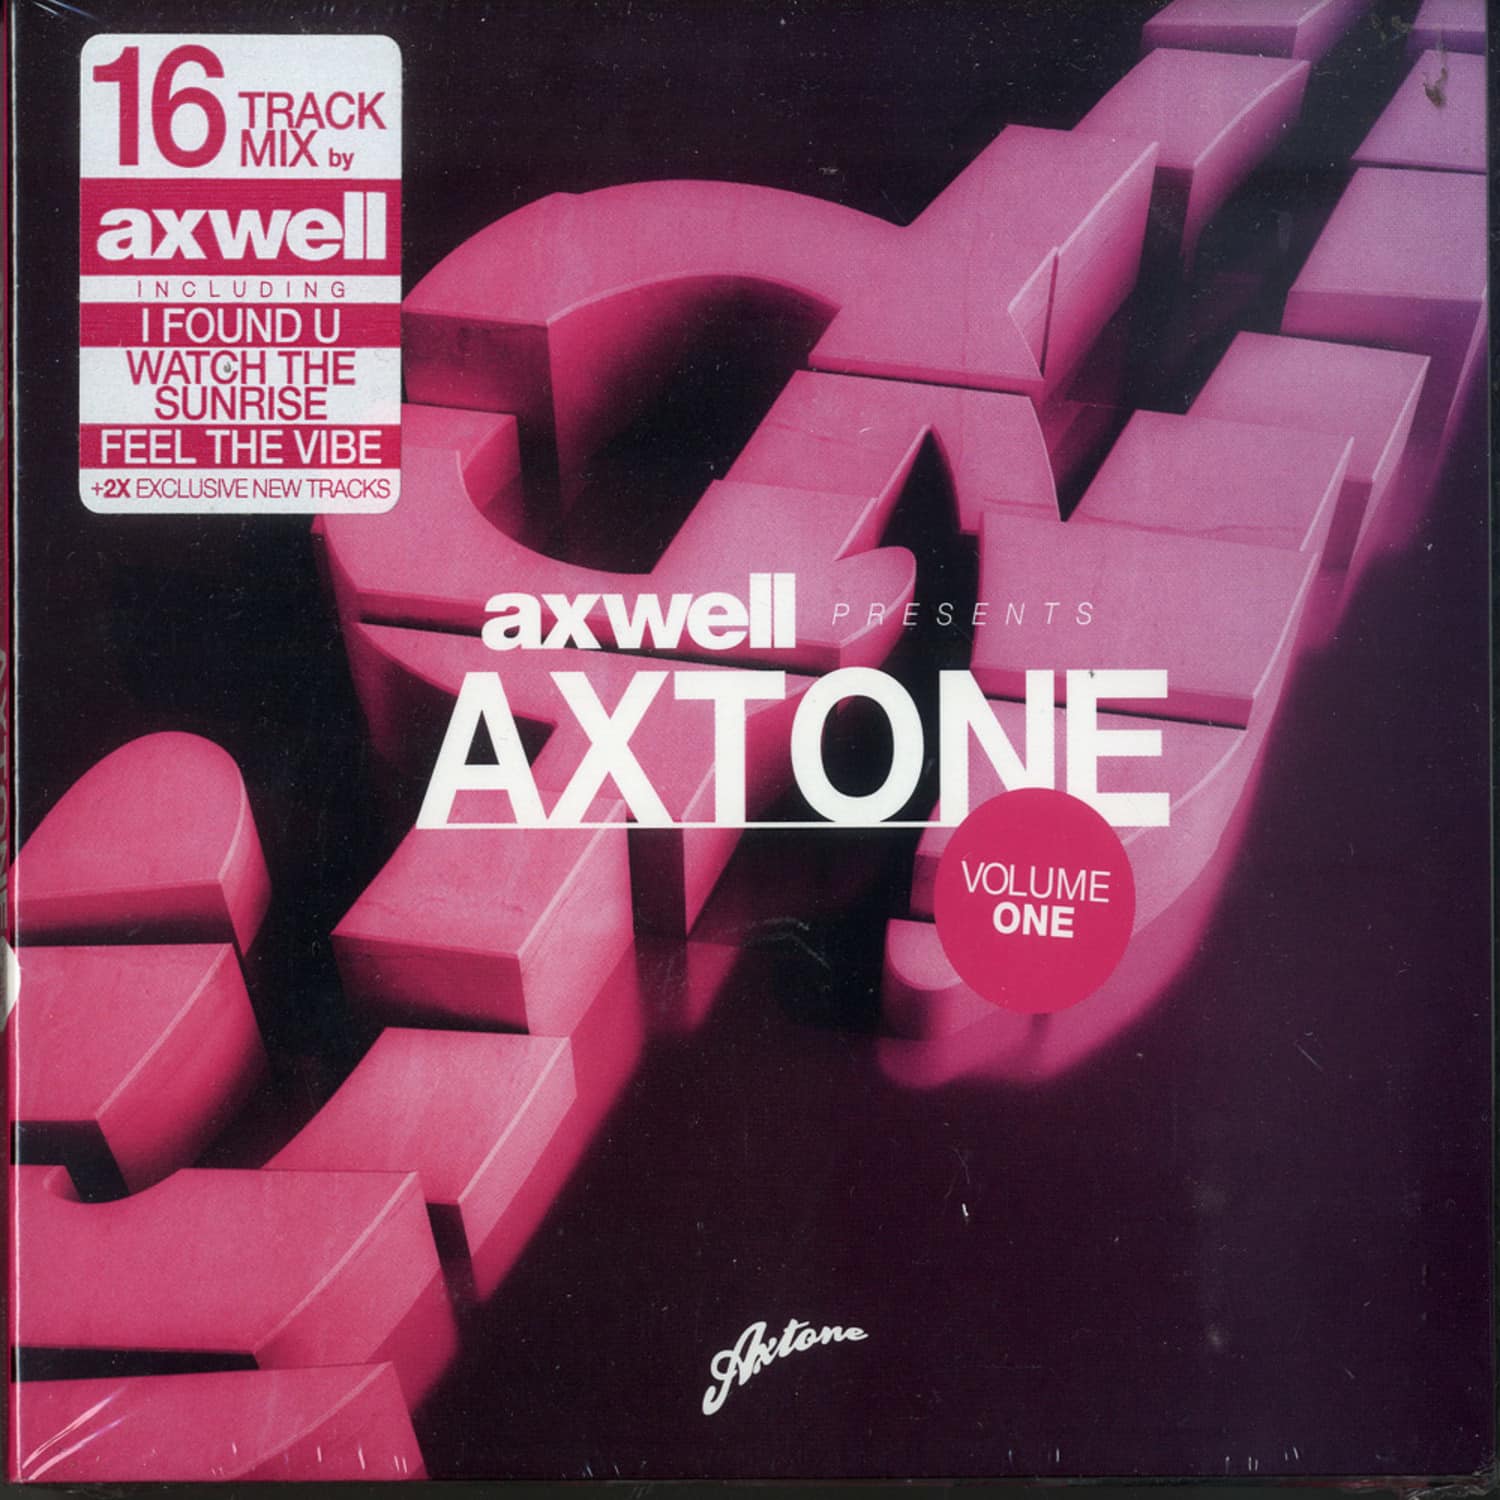 Various Artists - AXTONE VOL. 1 MIXED BY AXWELL 